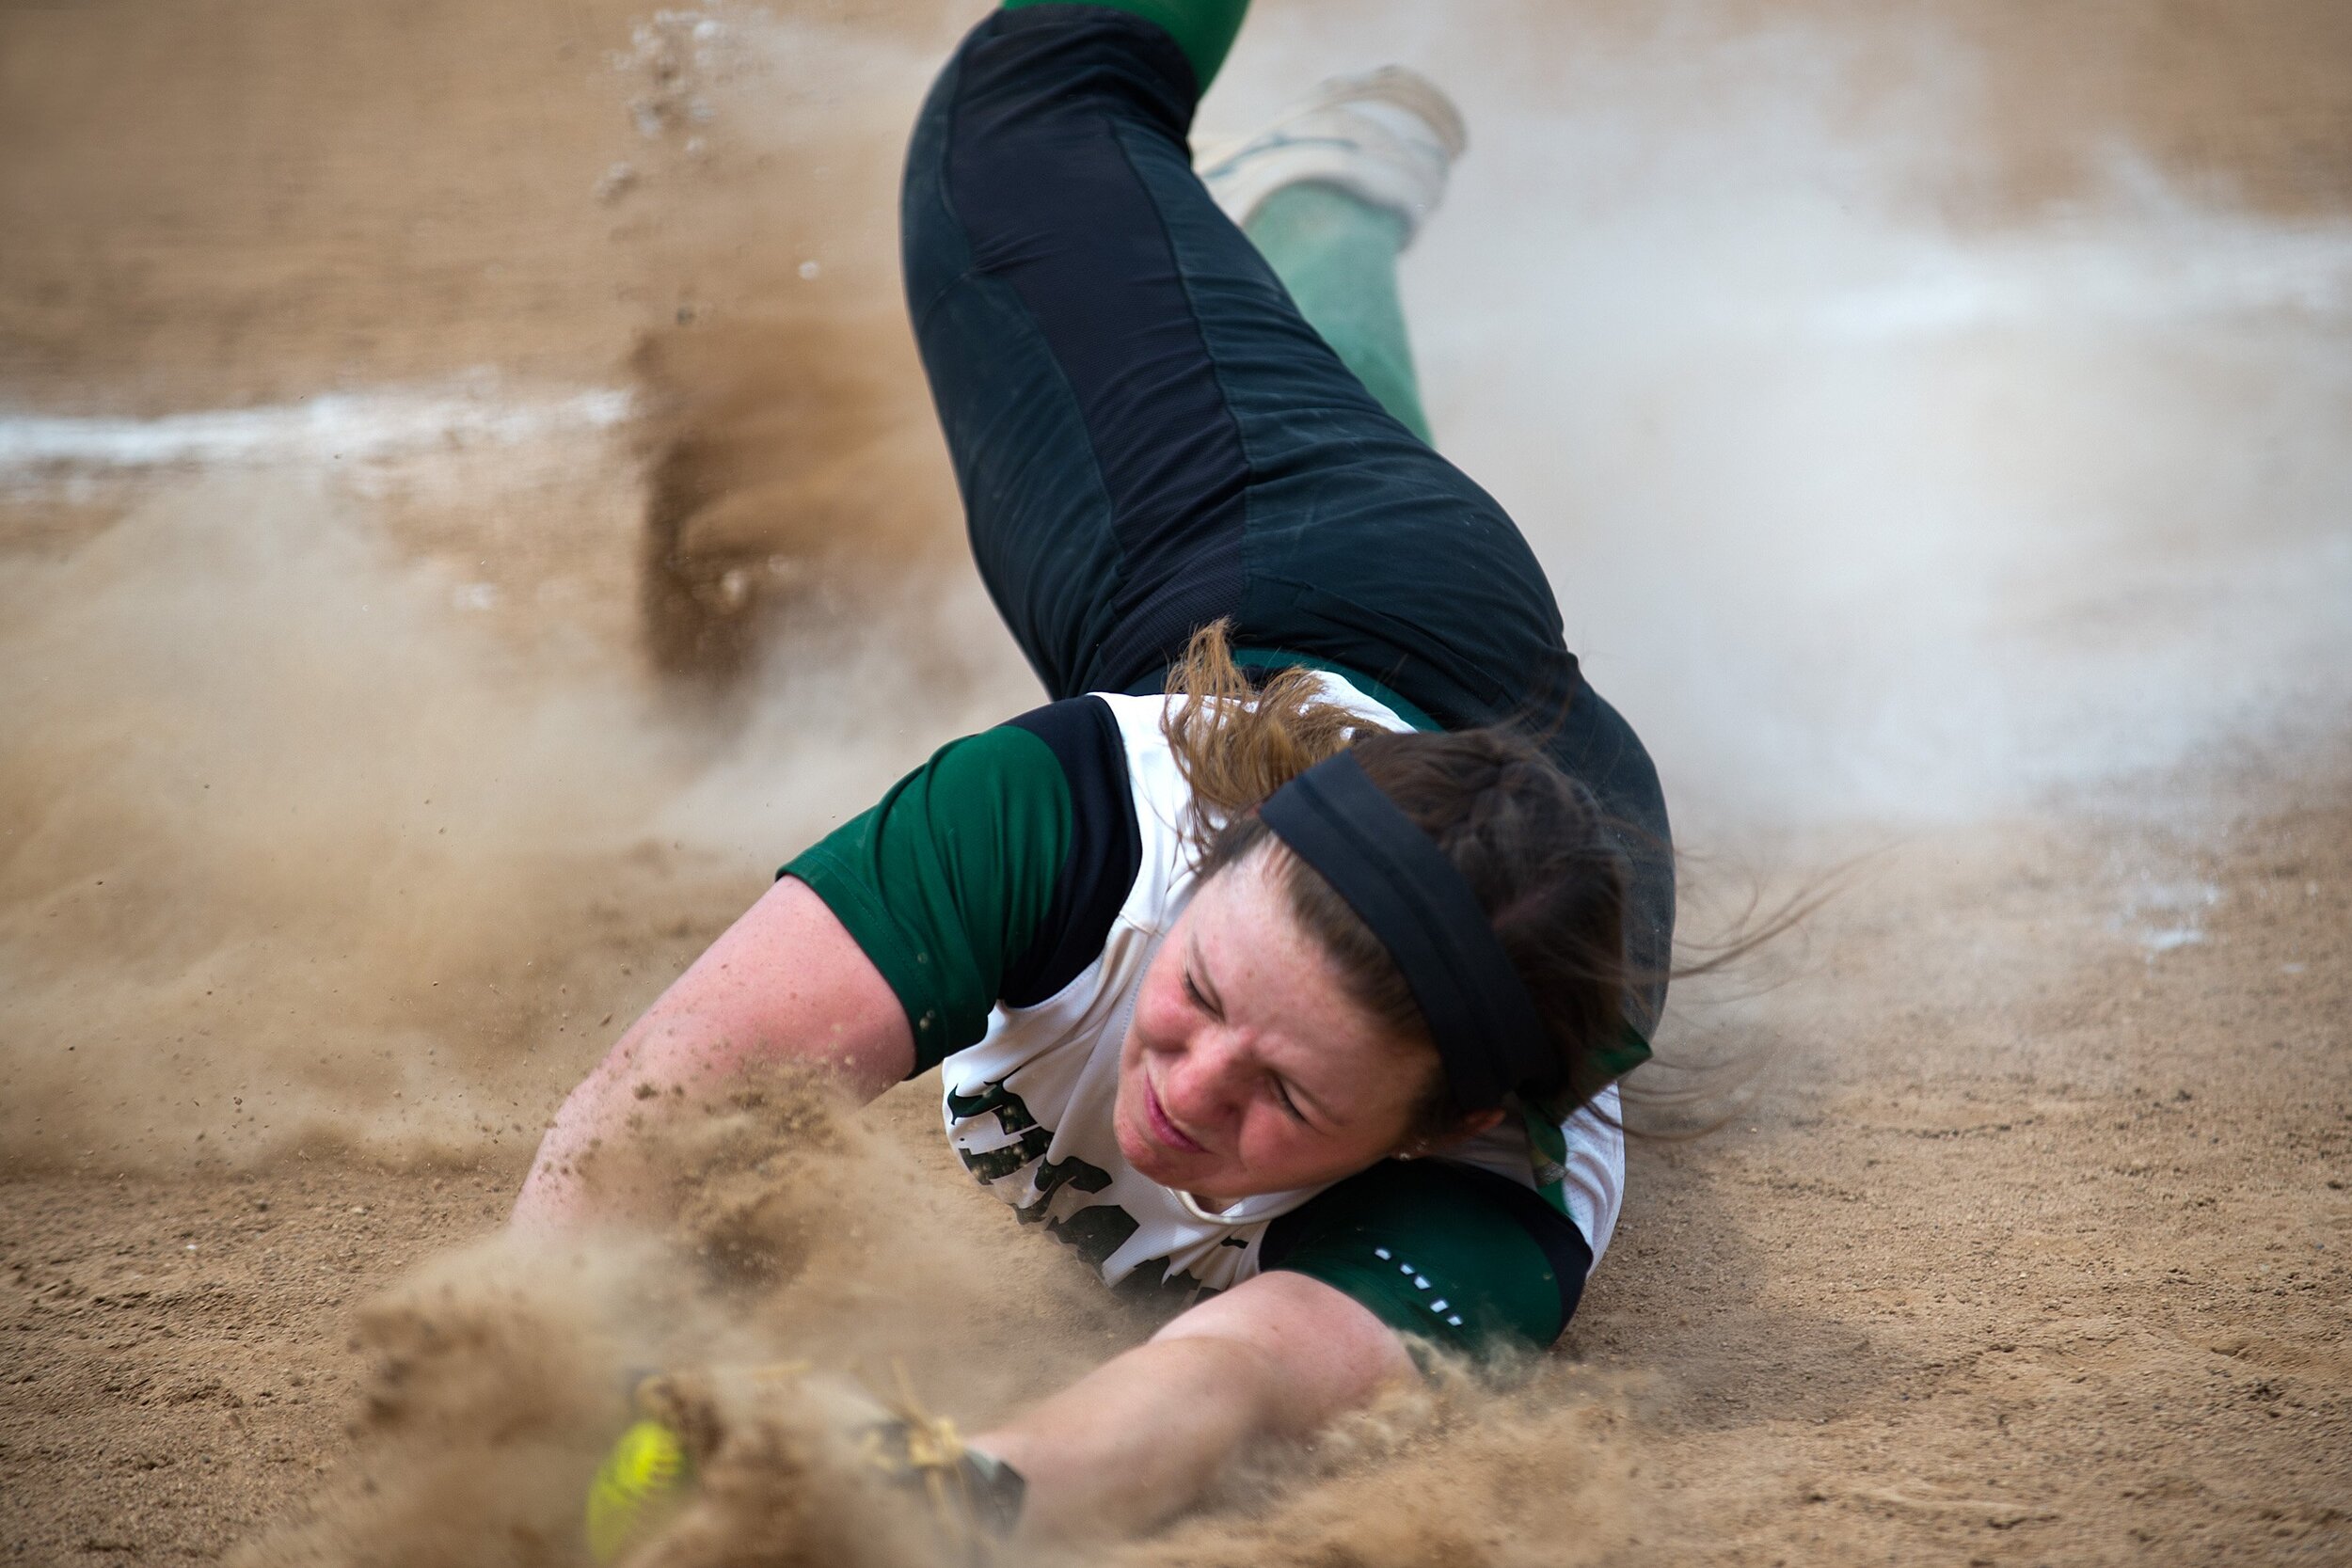  Illinois Wesleyan first baseman Kara Bischoff crashes into the dirt after catching a popup during the Titans’ 1-0 loss to Carthage in the College Conference of Illinois and Wisconsin softball tournament on Friday, May 4, 2018, in Bloomington, Illino